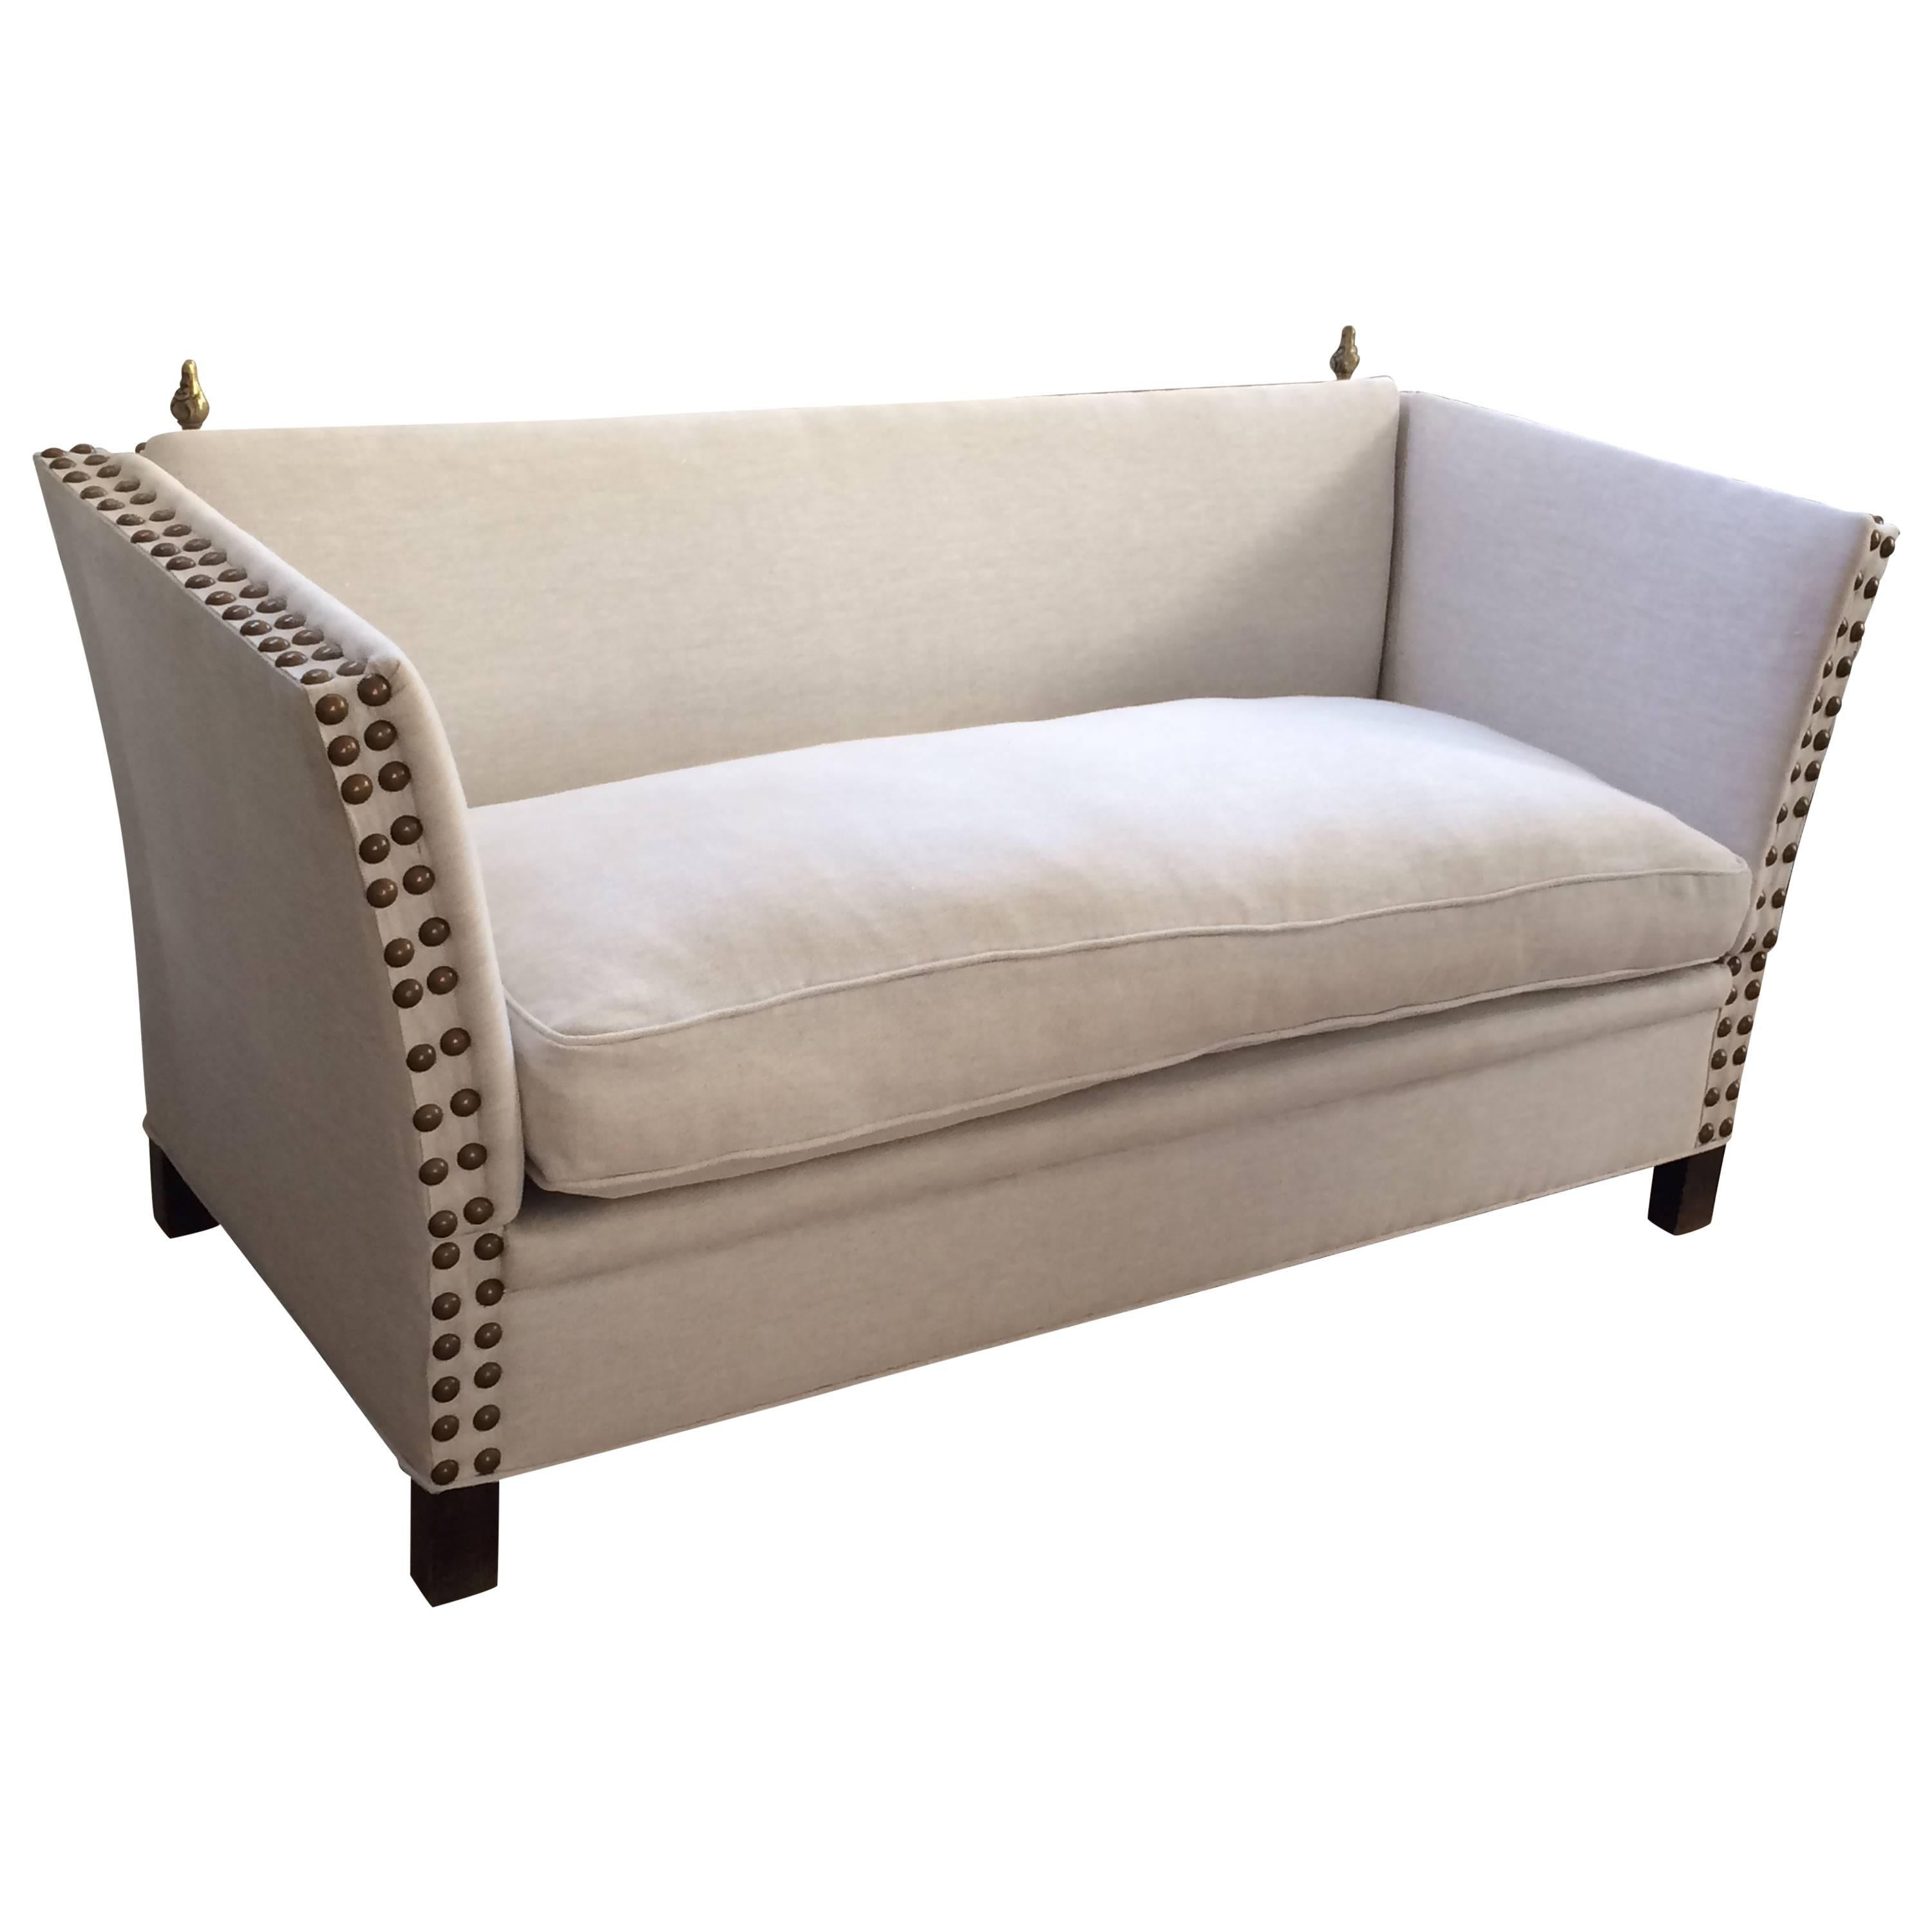 1020s French Knole Style Sofa